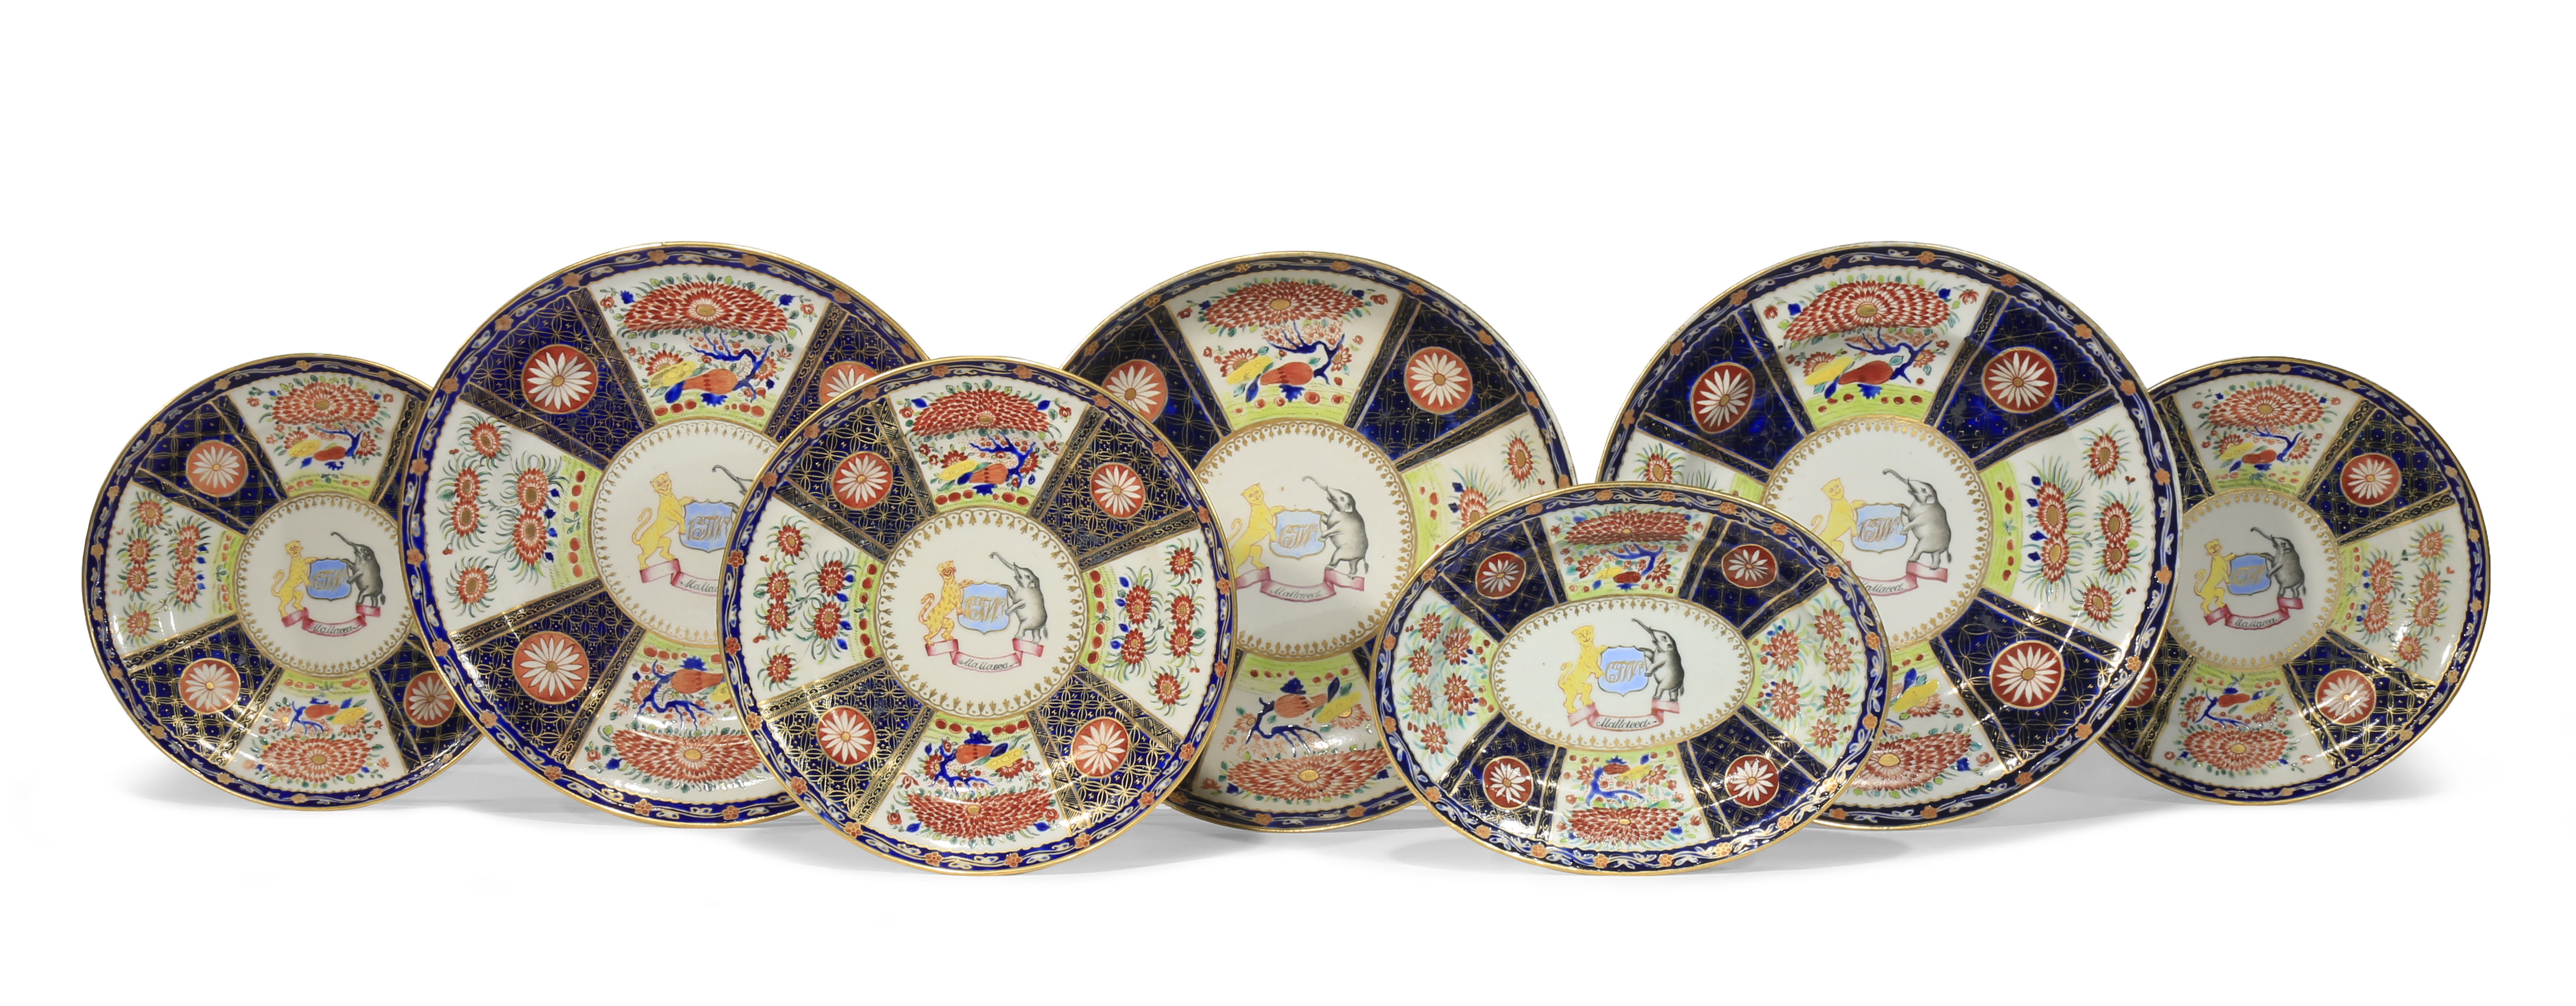 SEVEN CHINESE ARMORIAL DISHES FROM THE WOLTERBEEK SERVICE C.1818 Comprising: six circular dishes and